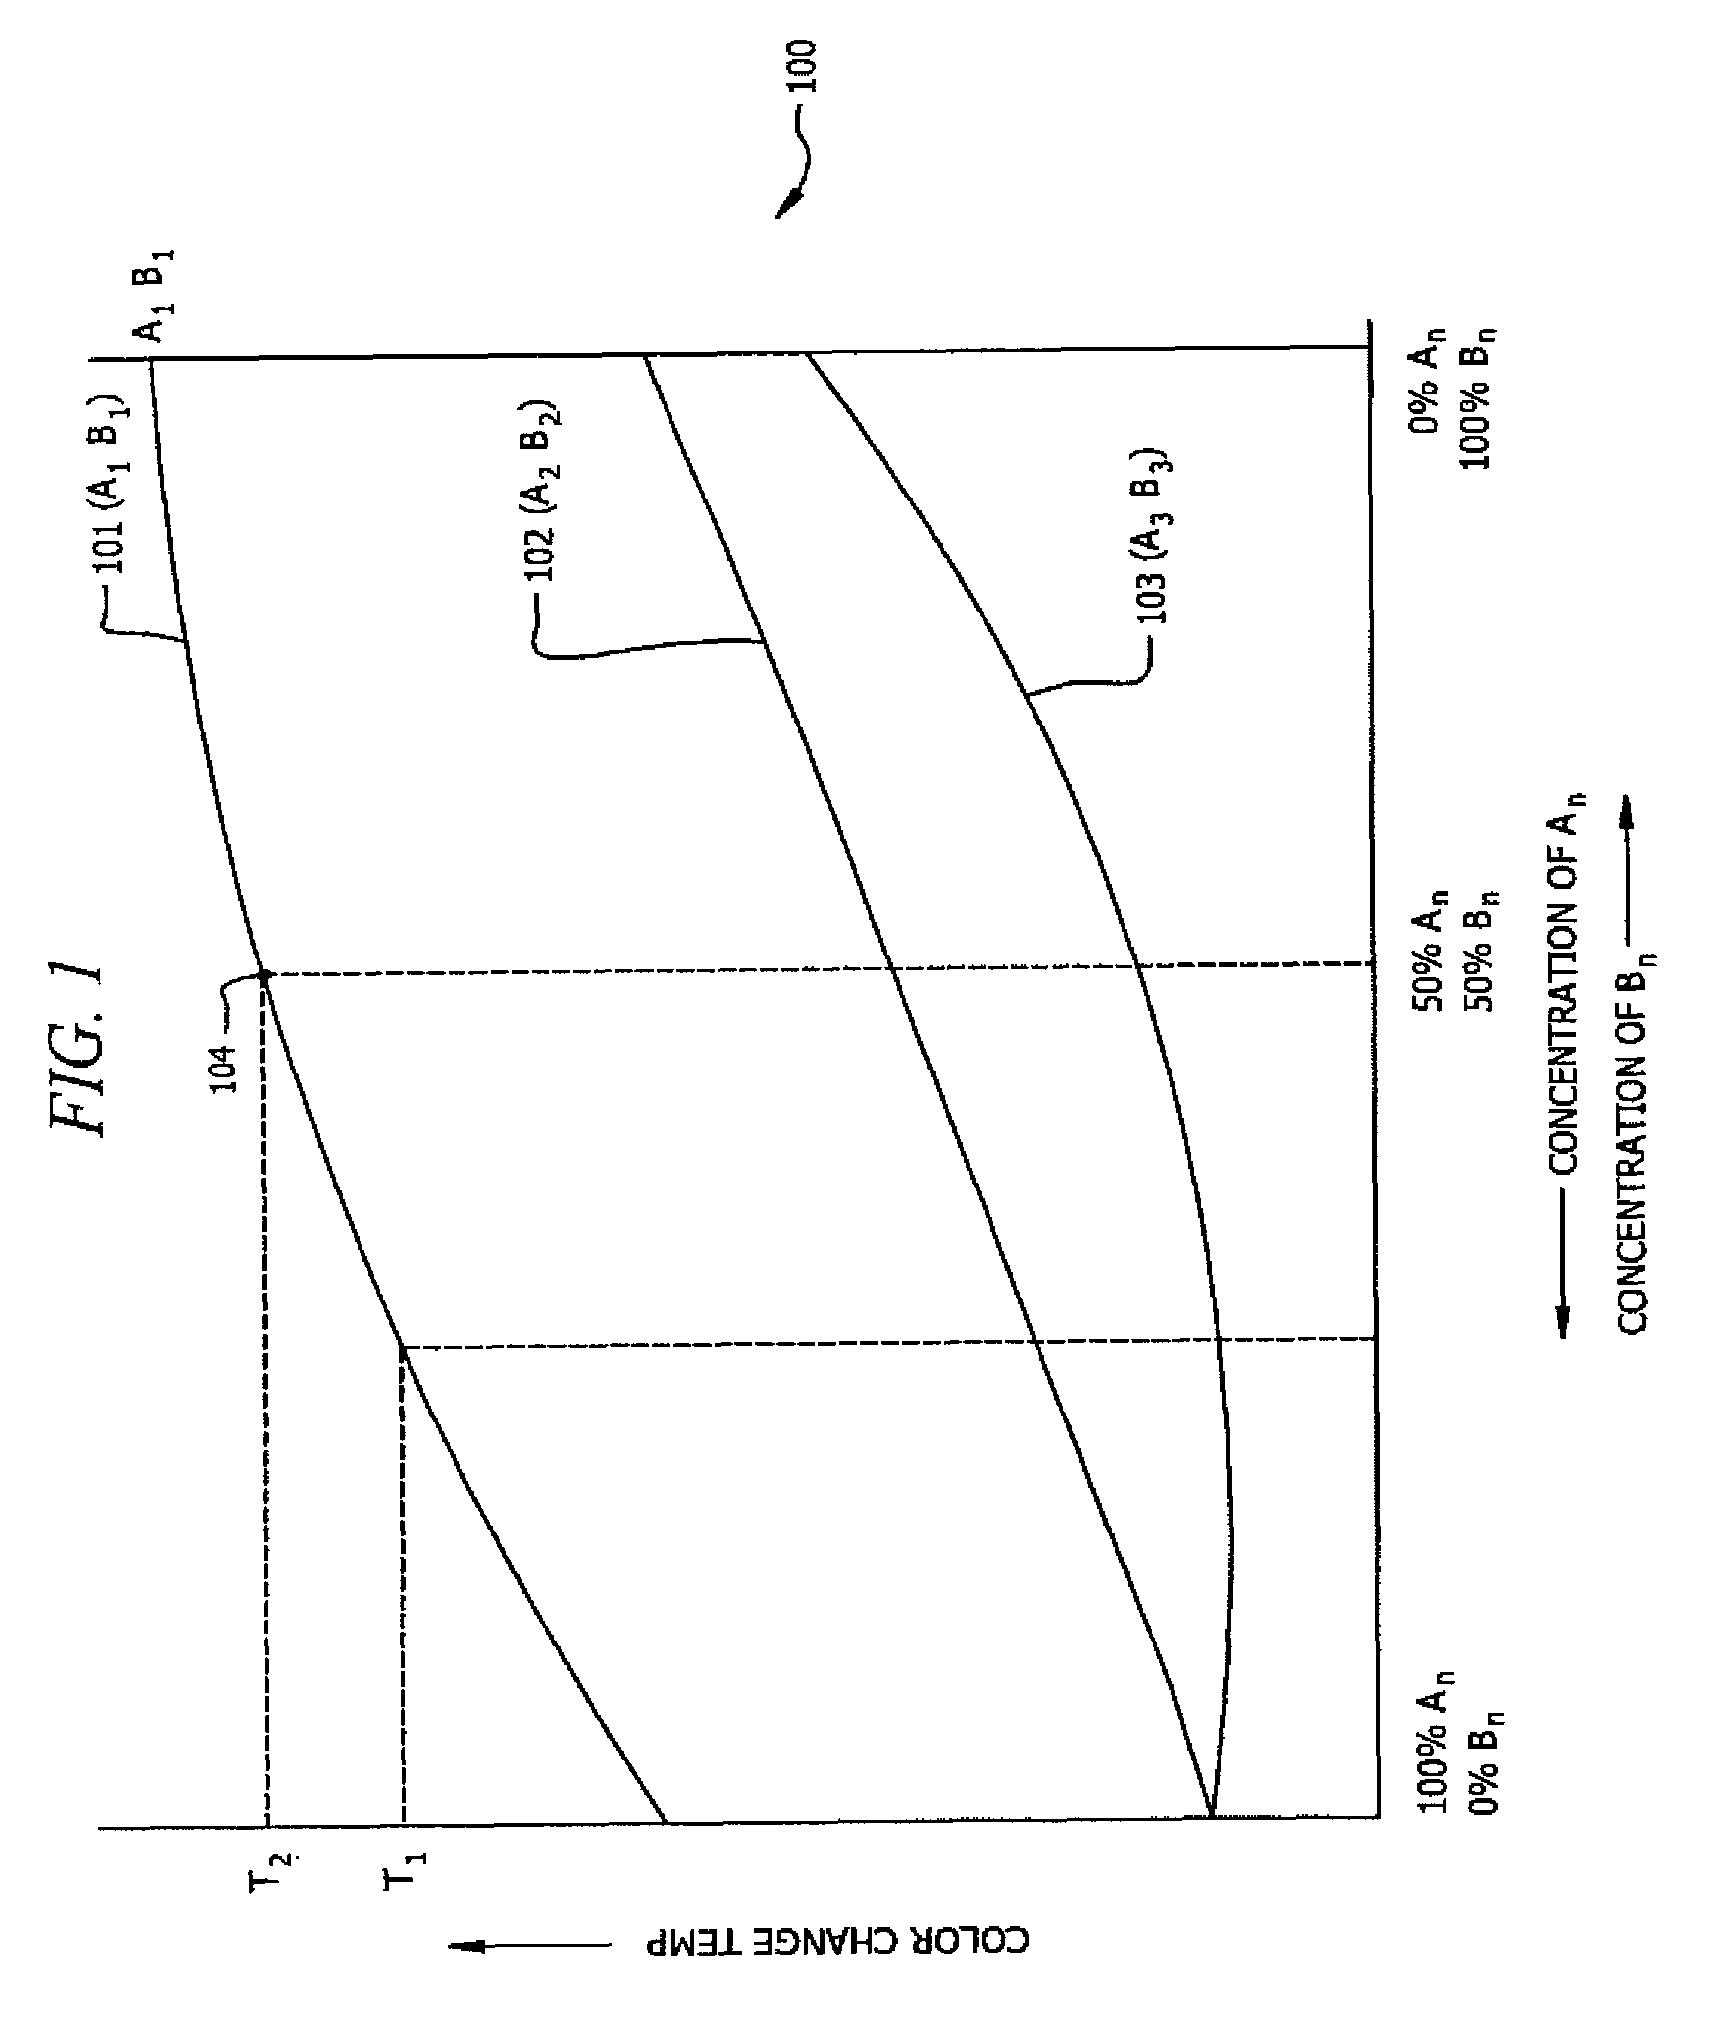 Co-topo-polymeric compositions, devices and systems for controlling threshold and delay activation sensitivities